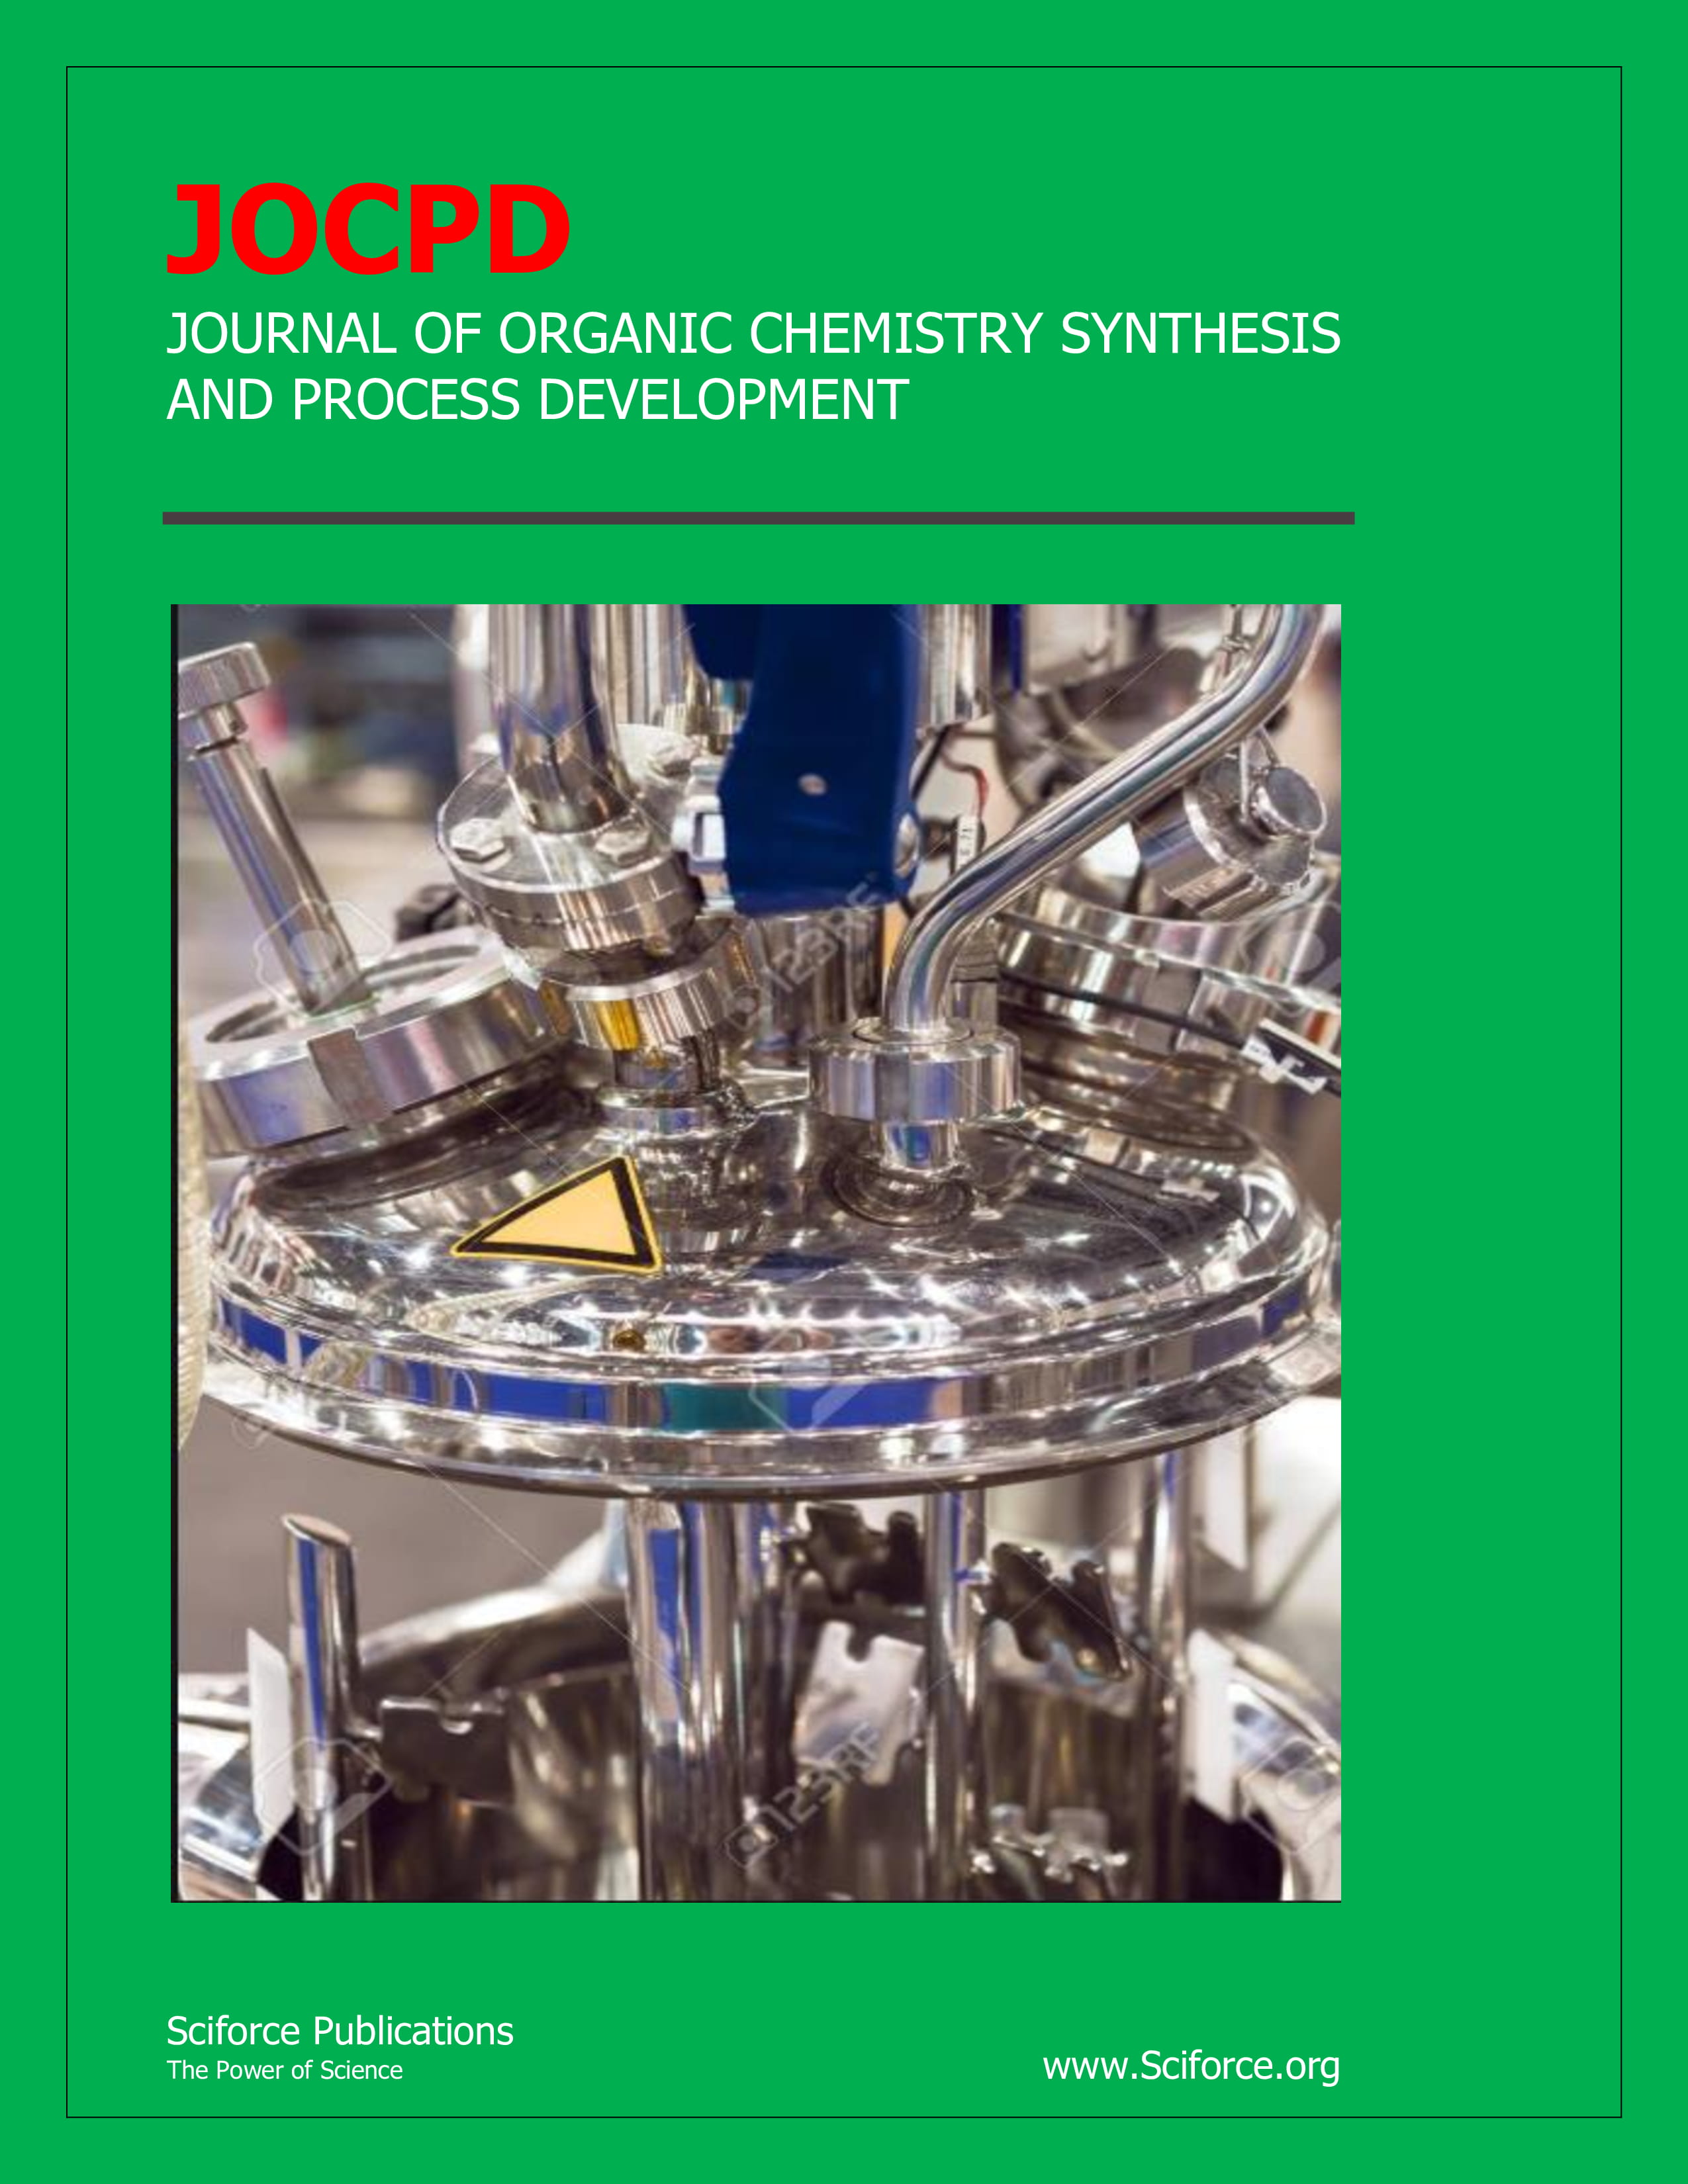 Journal of Organic Chemistry Synthesis and Process Development